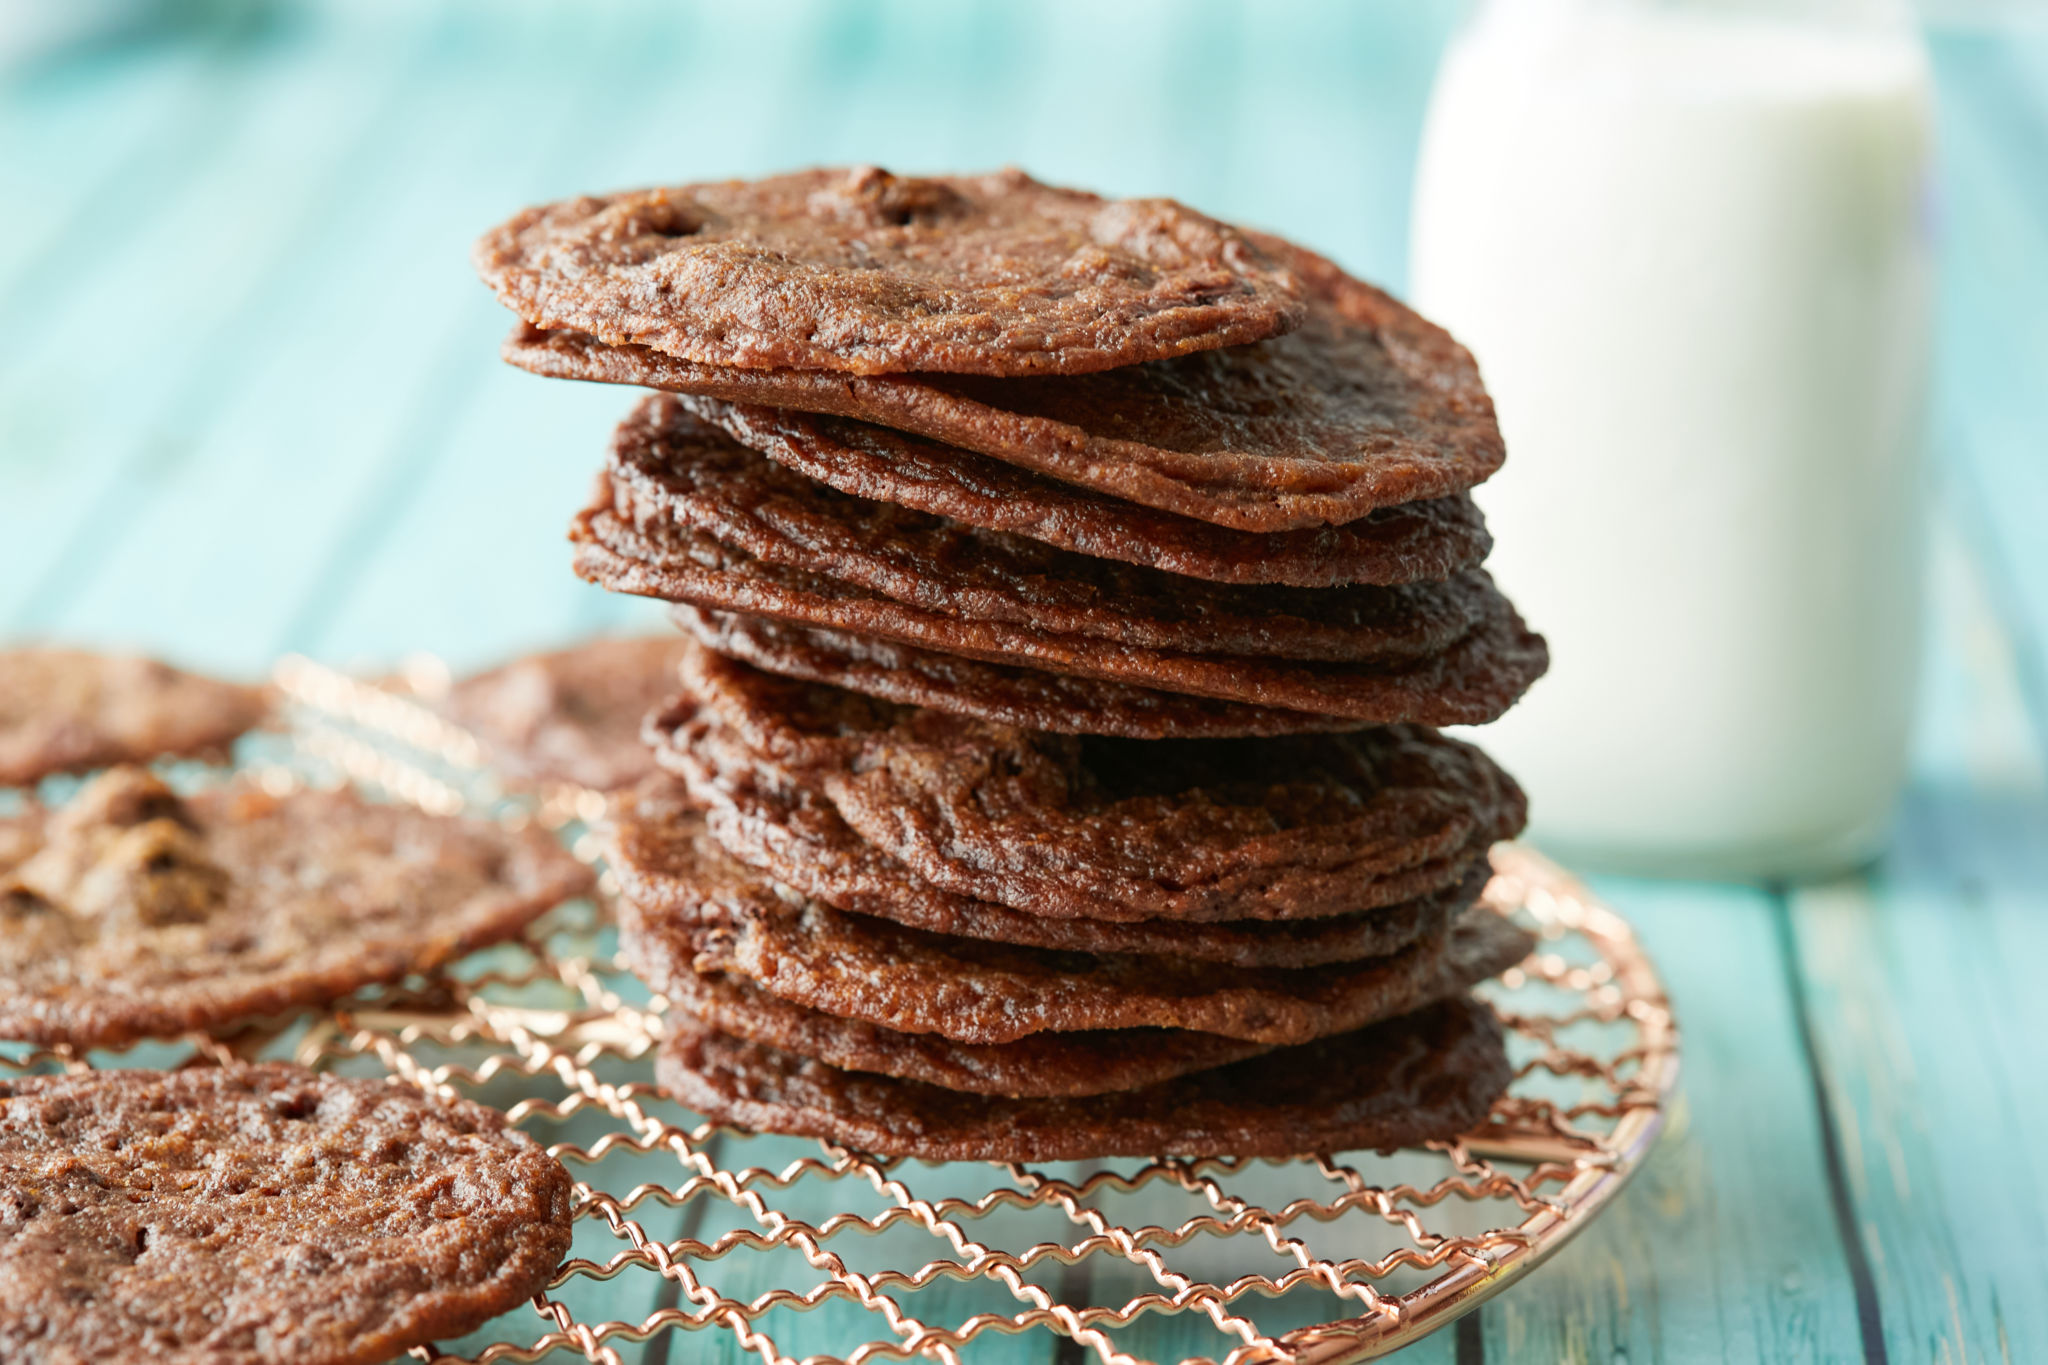 A big stack of thin chocolate chip cookies, made from my crunchy chocolate chip cookies recipe.